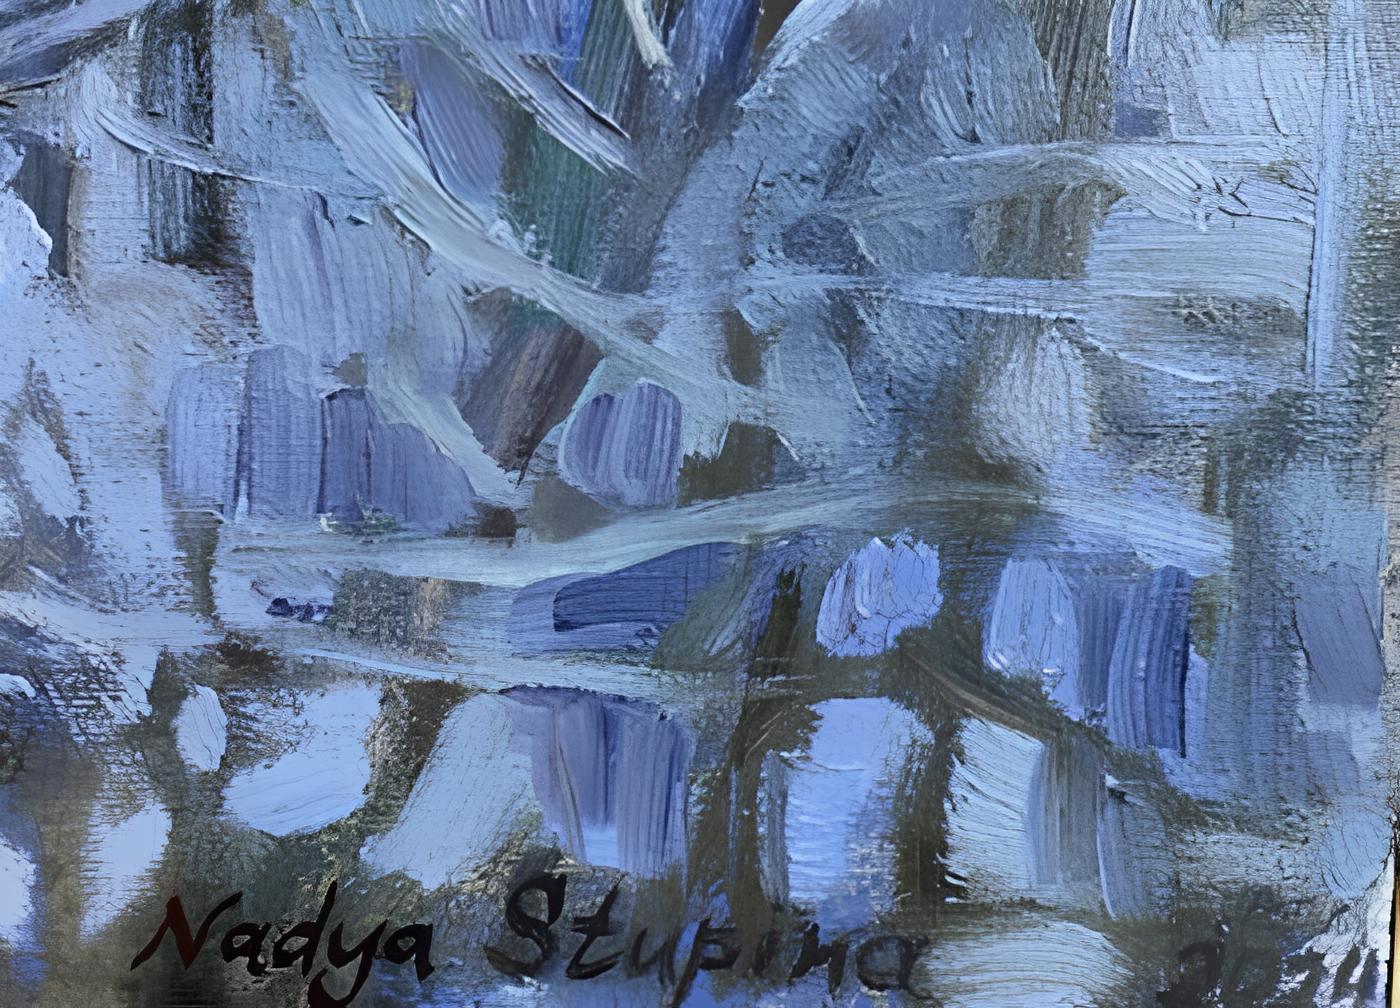 In crafting this piece, I immersed myself in the serene yet vibrant essence of winter. Through impressionistic strokes in oil, I aimed to capture the intricate dance of light and shadow amidst snow-laden branches, evoking the delicate interplay of